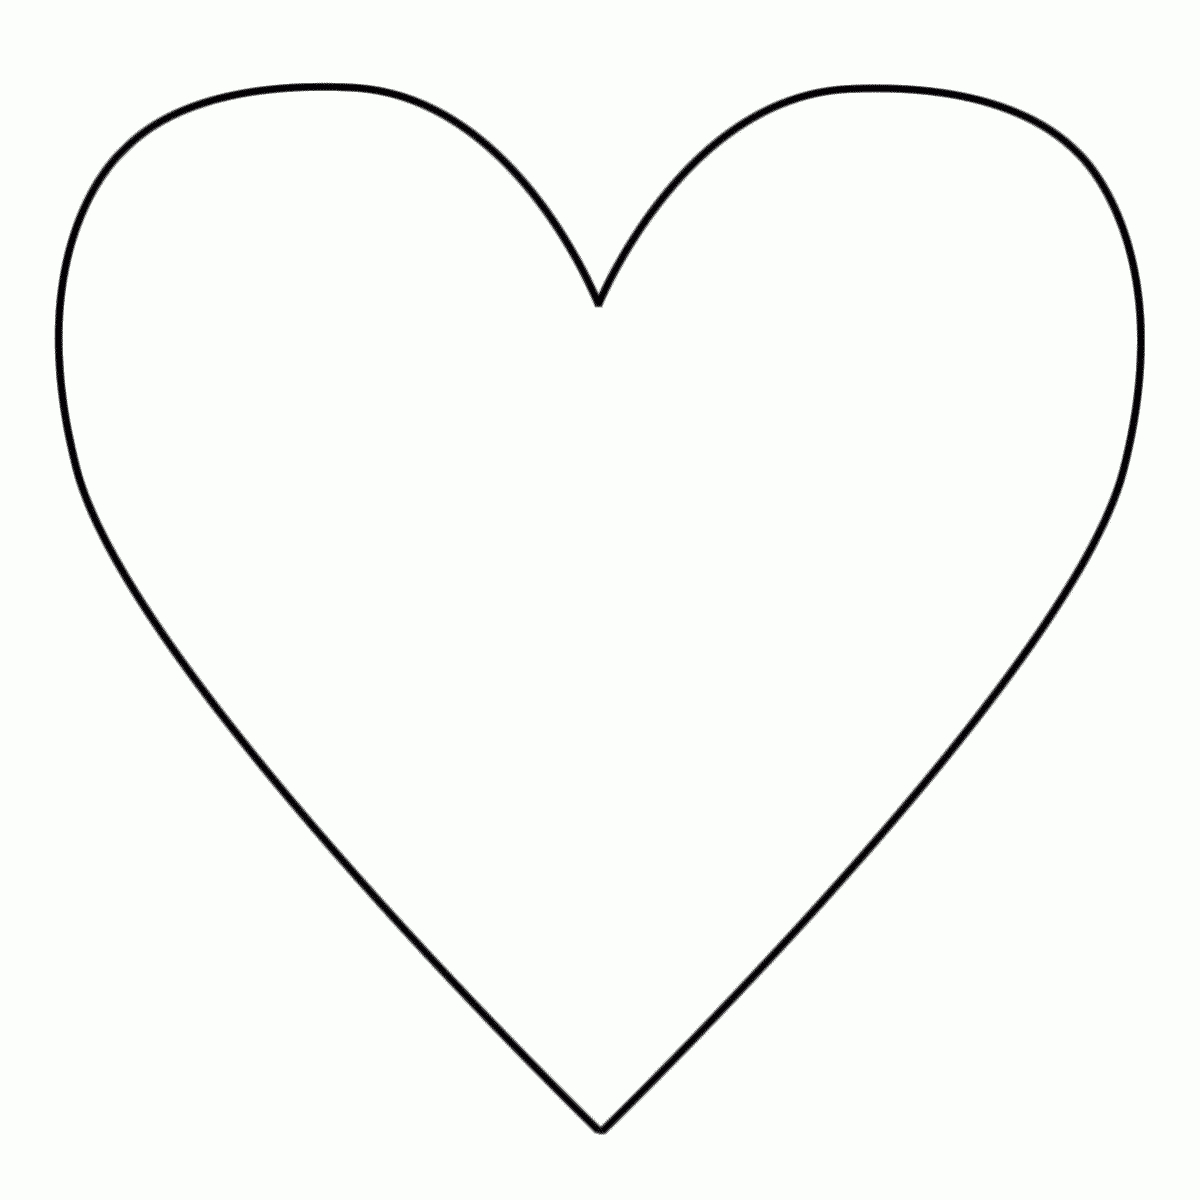 Free Printable Heart Coloring Pages For Kids | Girl Stuff | Heart - Free Printables Of Hearts